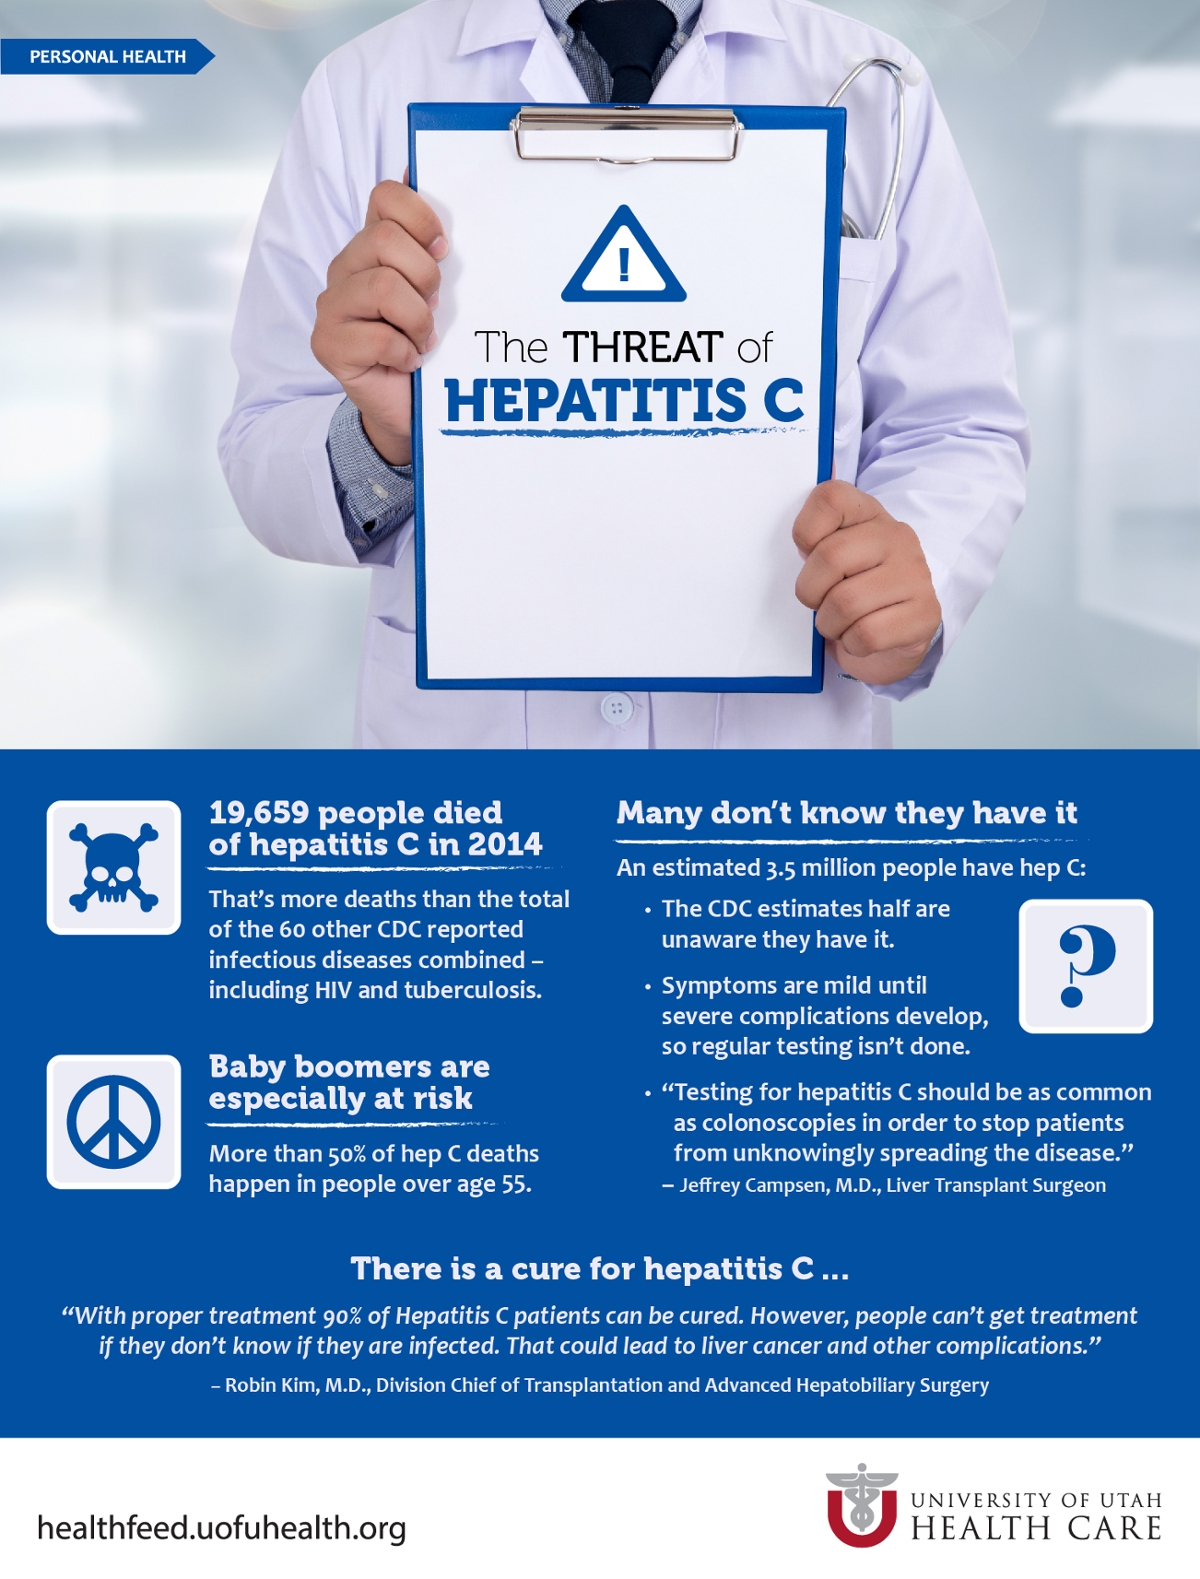 Infographic with facts about hepatitis C